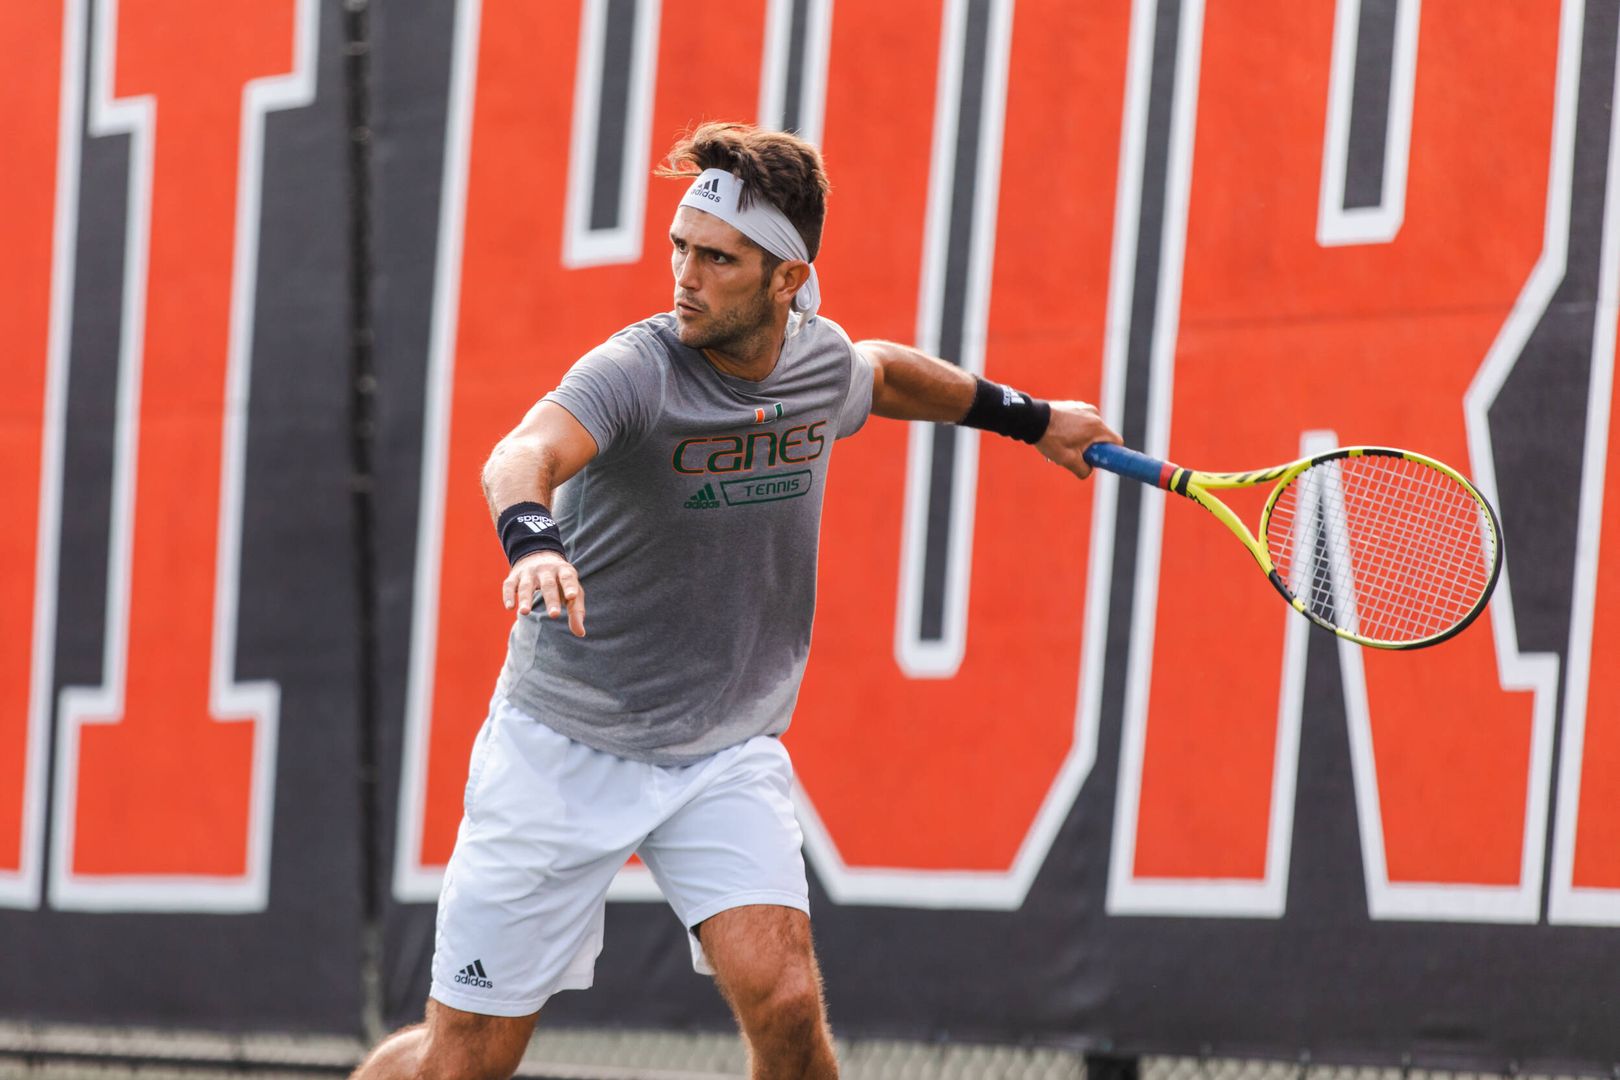 Canes Kick Off Dual Match Play on Monday